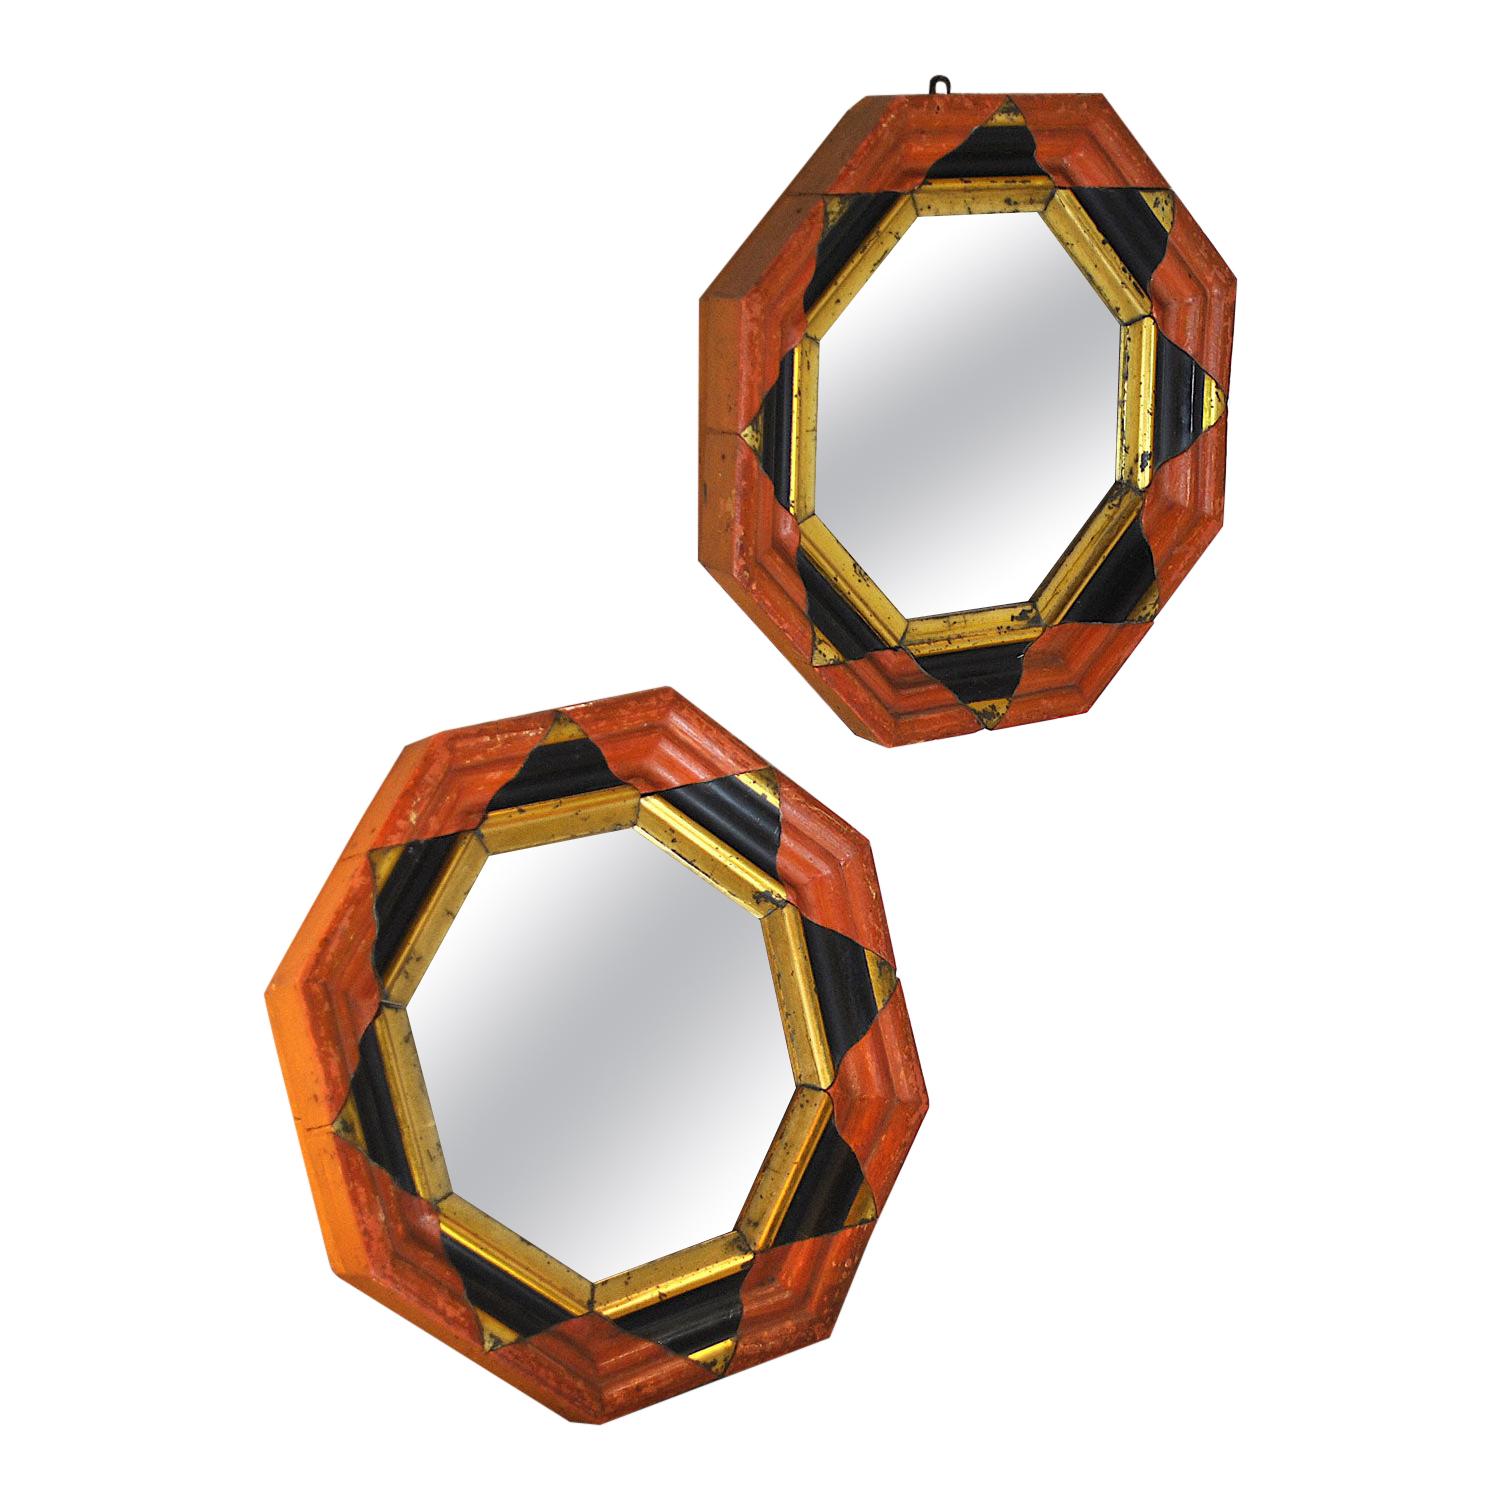 Pair of Mirrors with a Worked Hexagonal Frame